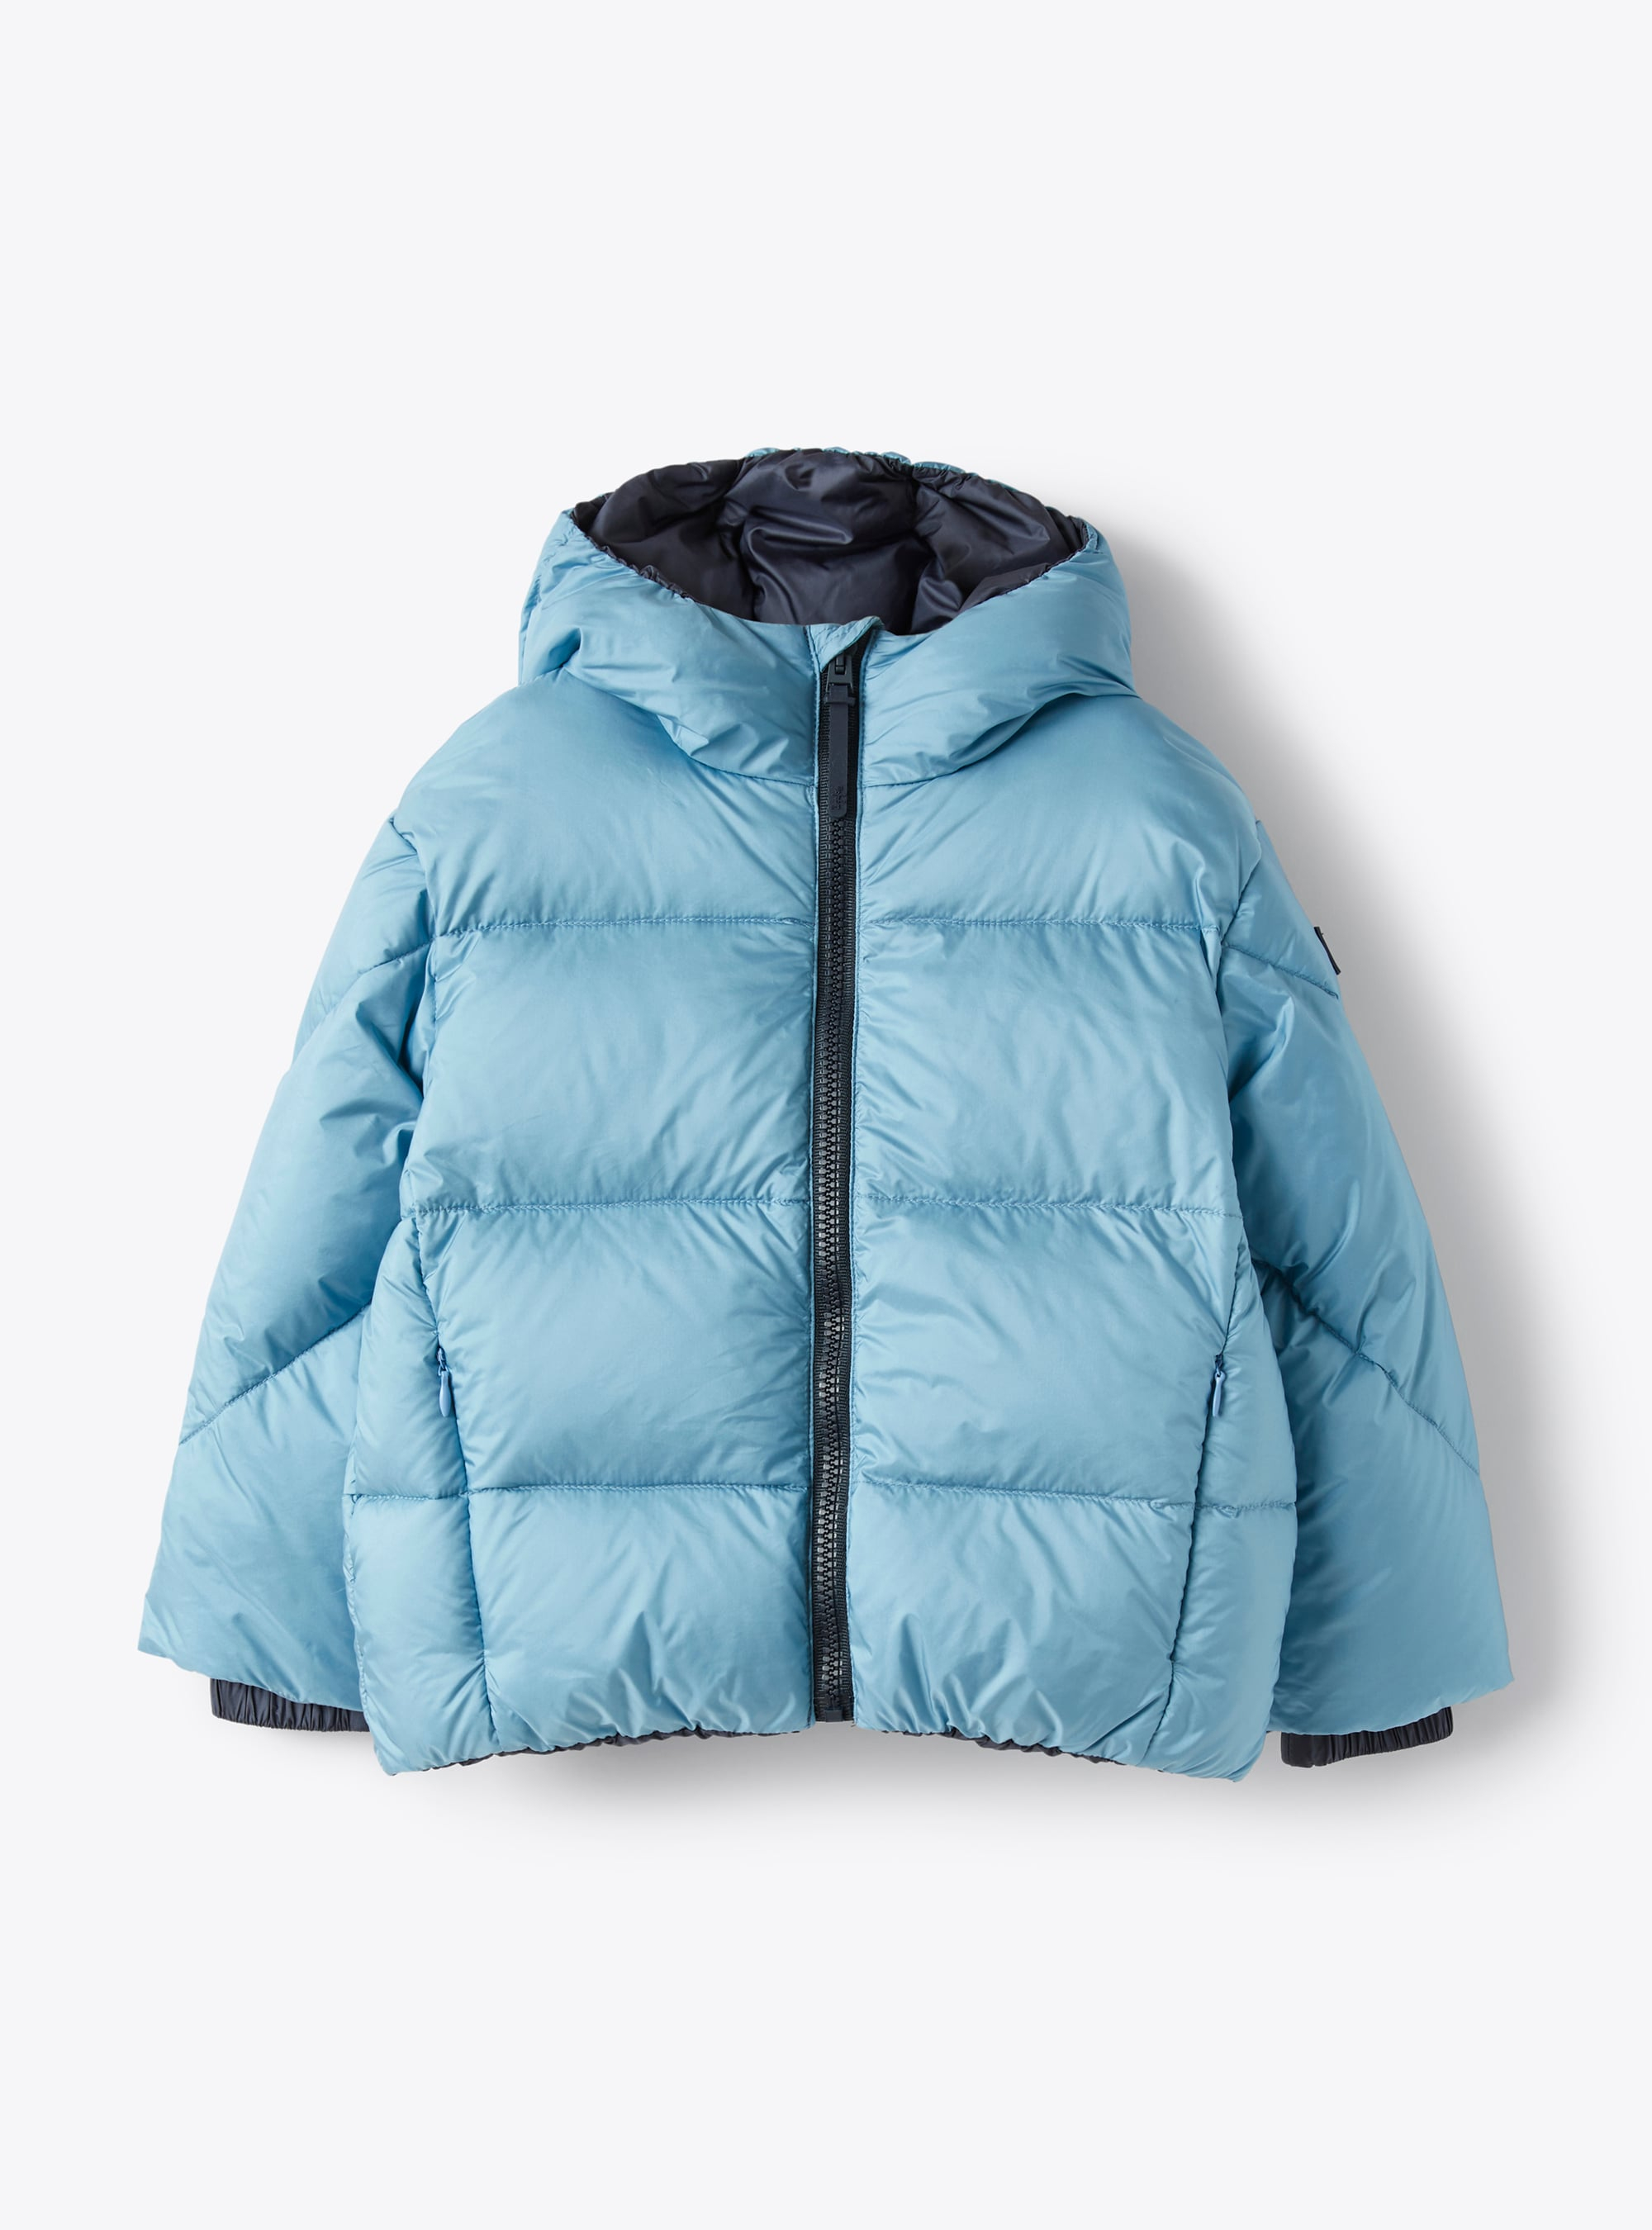 Short down jacket with contrasting details - Light blue | Il Gufo